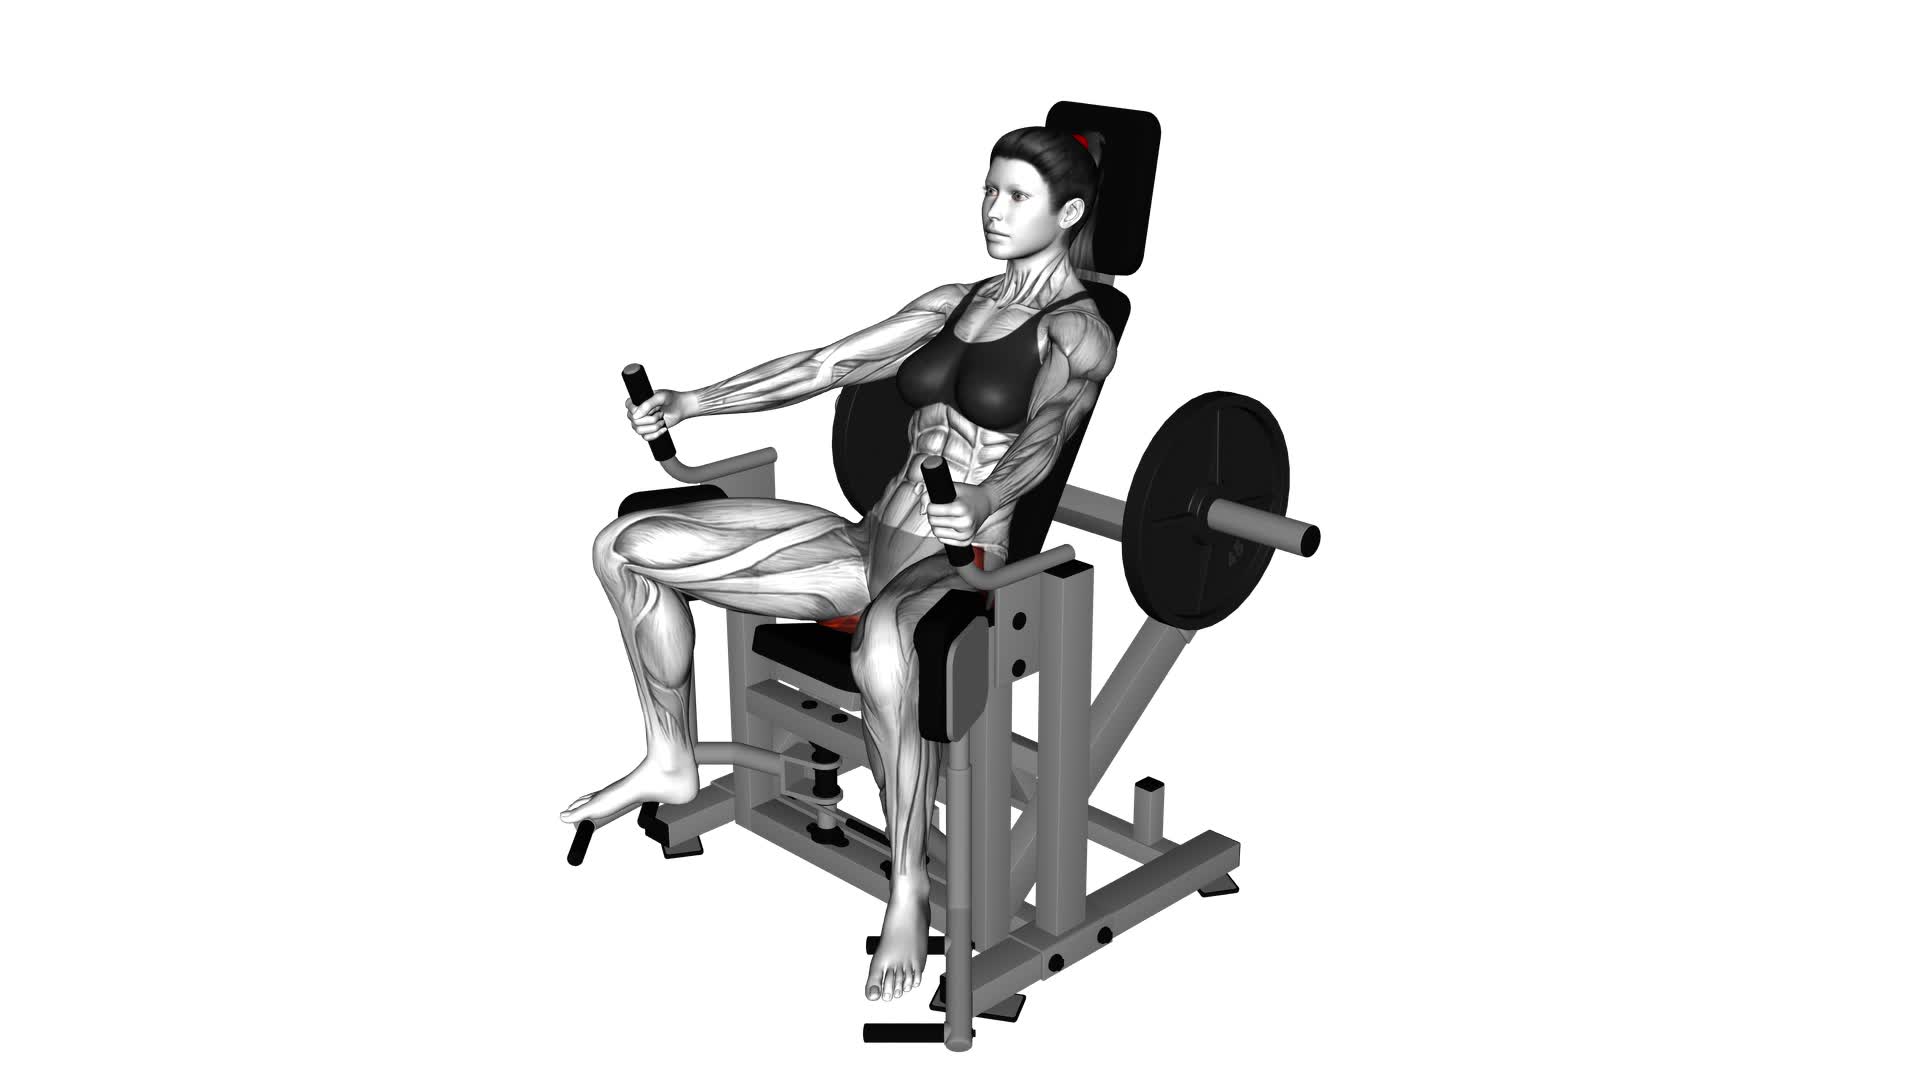 Lever Glute Abductors Press (female) - Video Exercise Guide & Tips